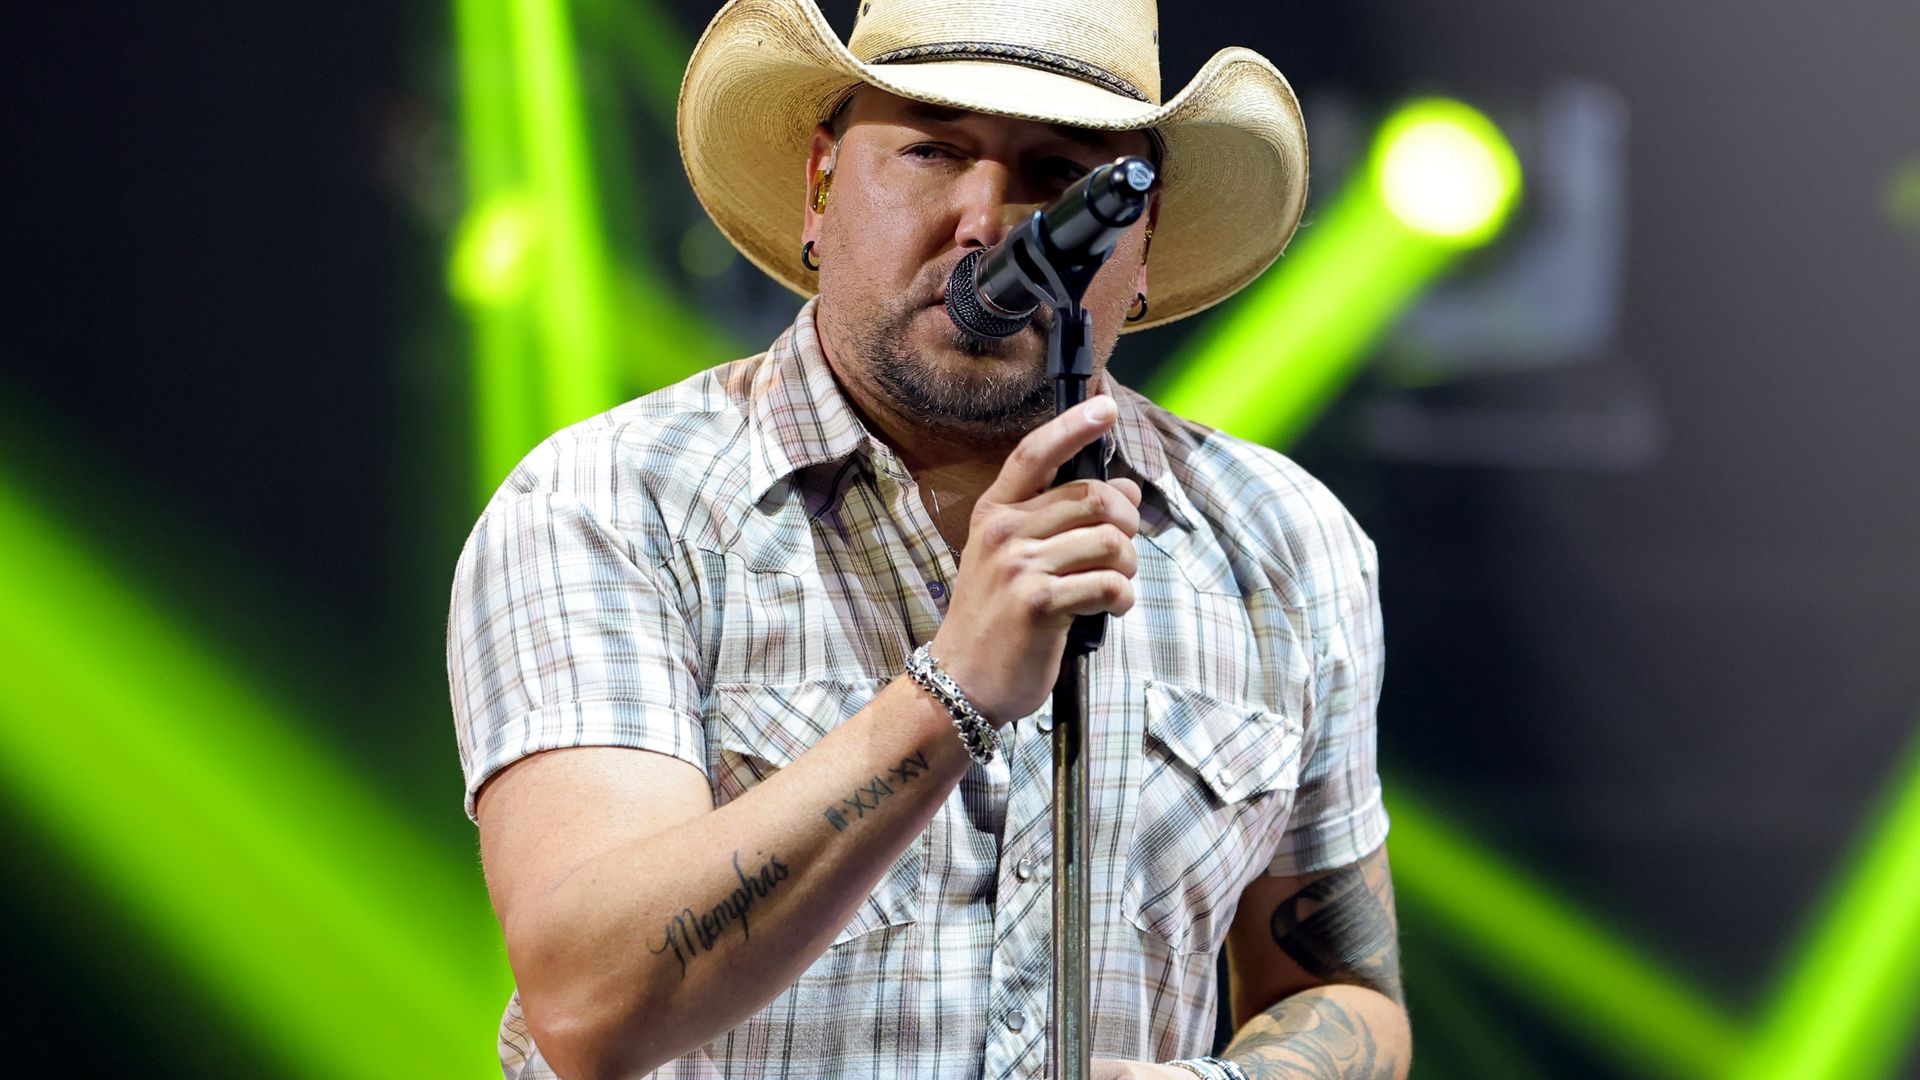 Jason Aldean performs live onstage at the iHeartCountry Album Release Party for his new album "Georgia" at iHeartRadio Theater on April 21, 2022 in Burbank, California